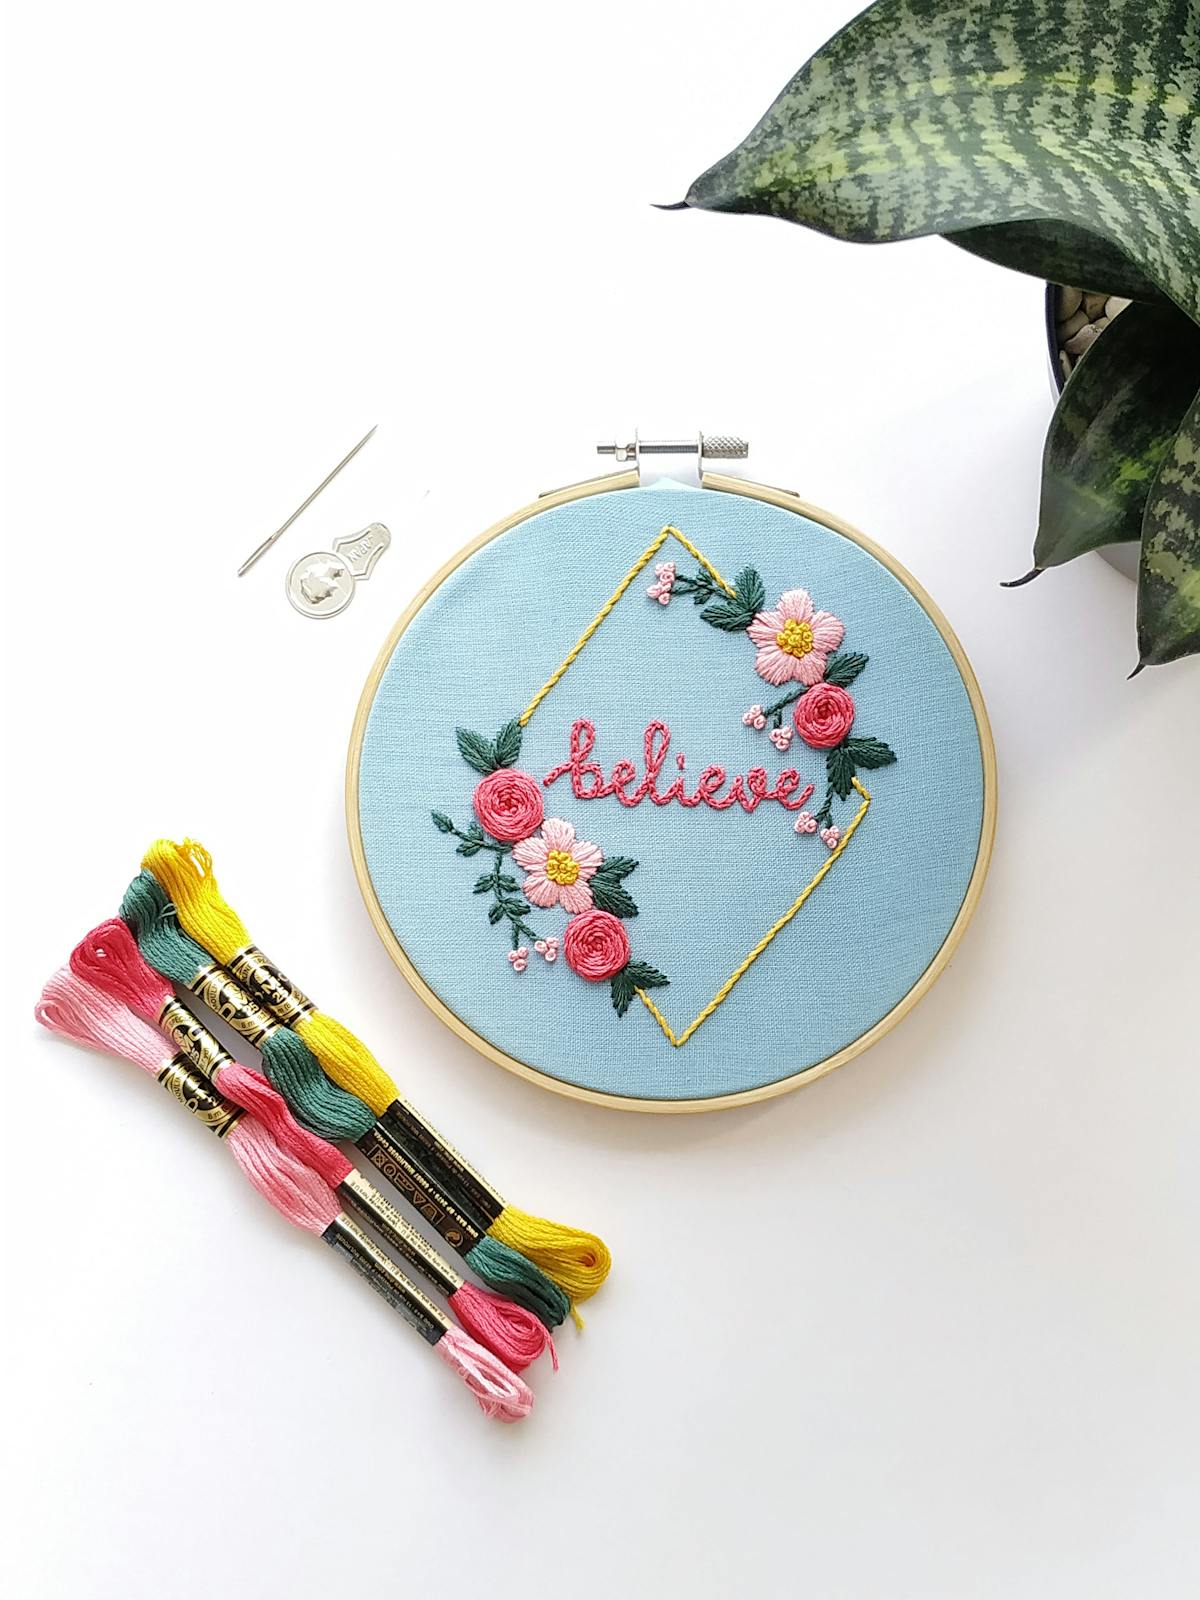 Hoopies Art quote embroidery